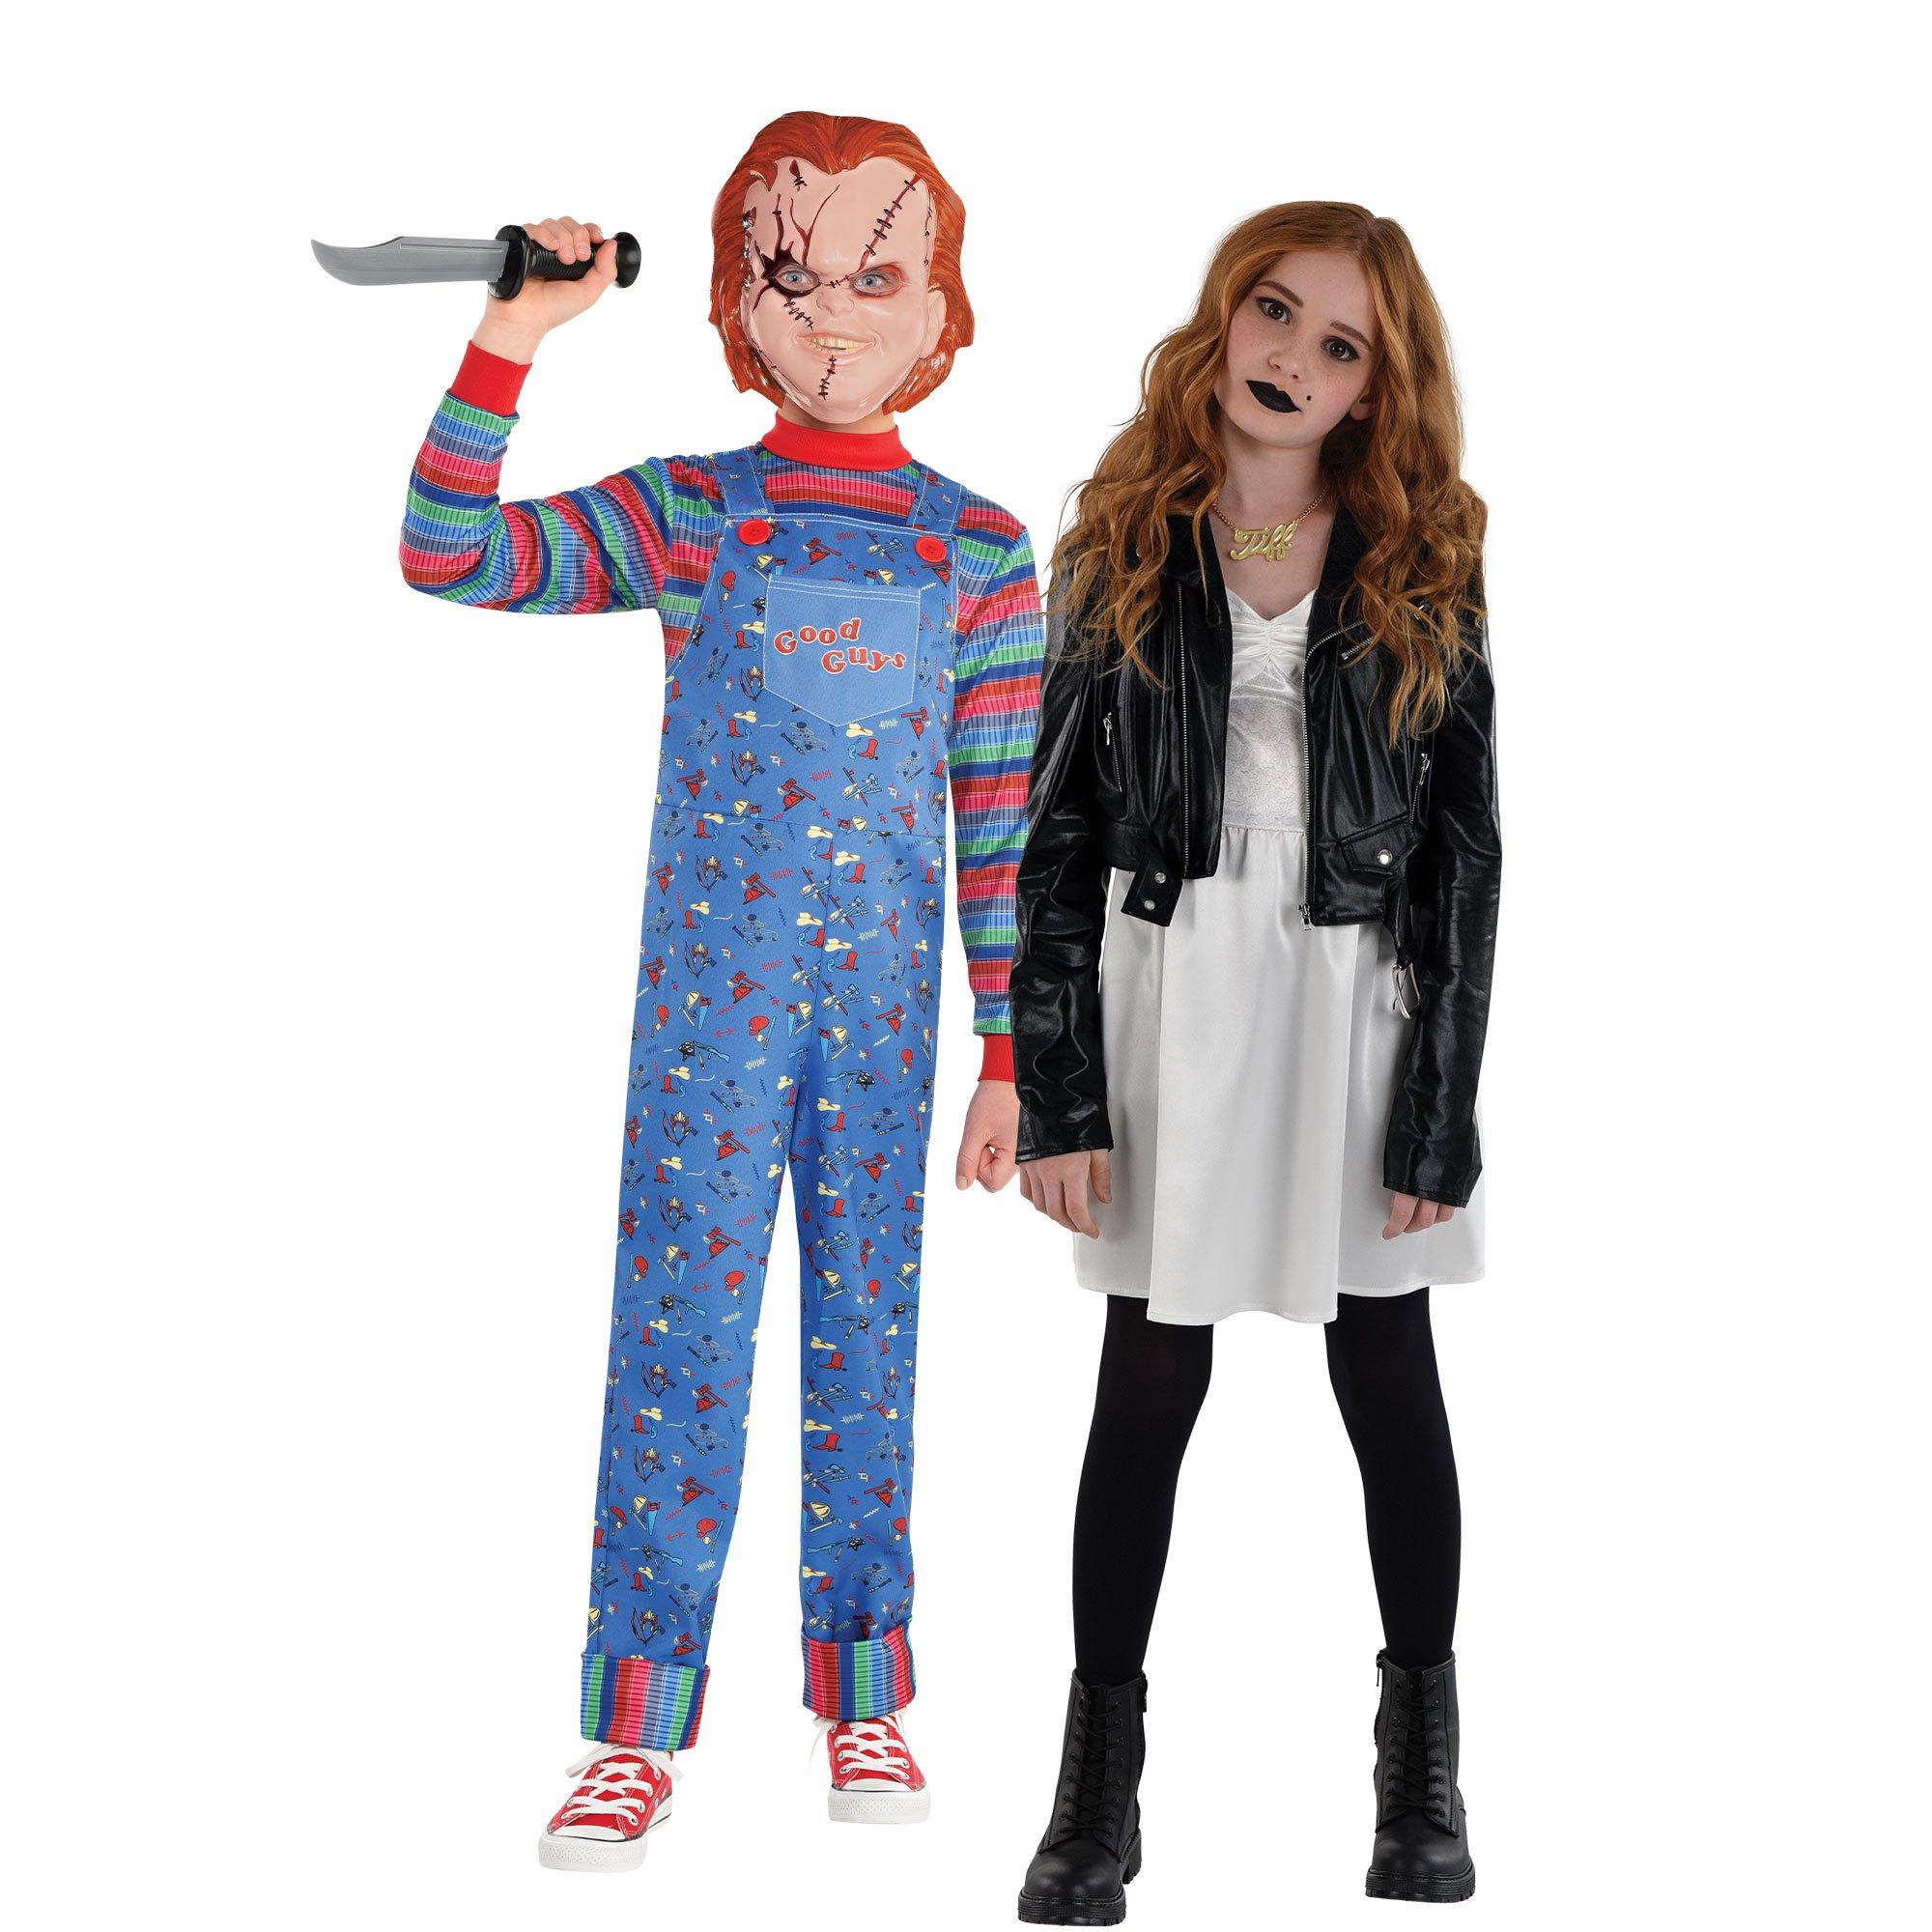 seed of chucky costume